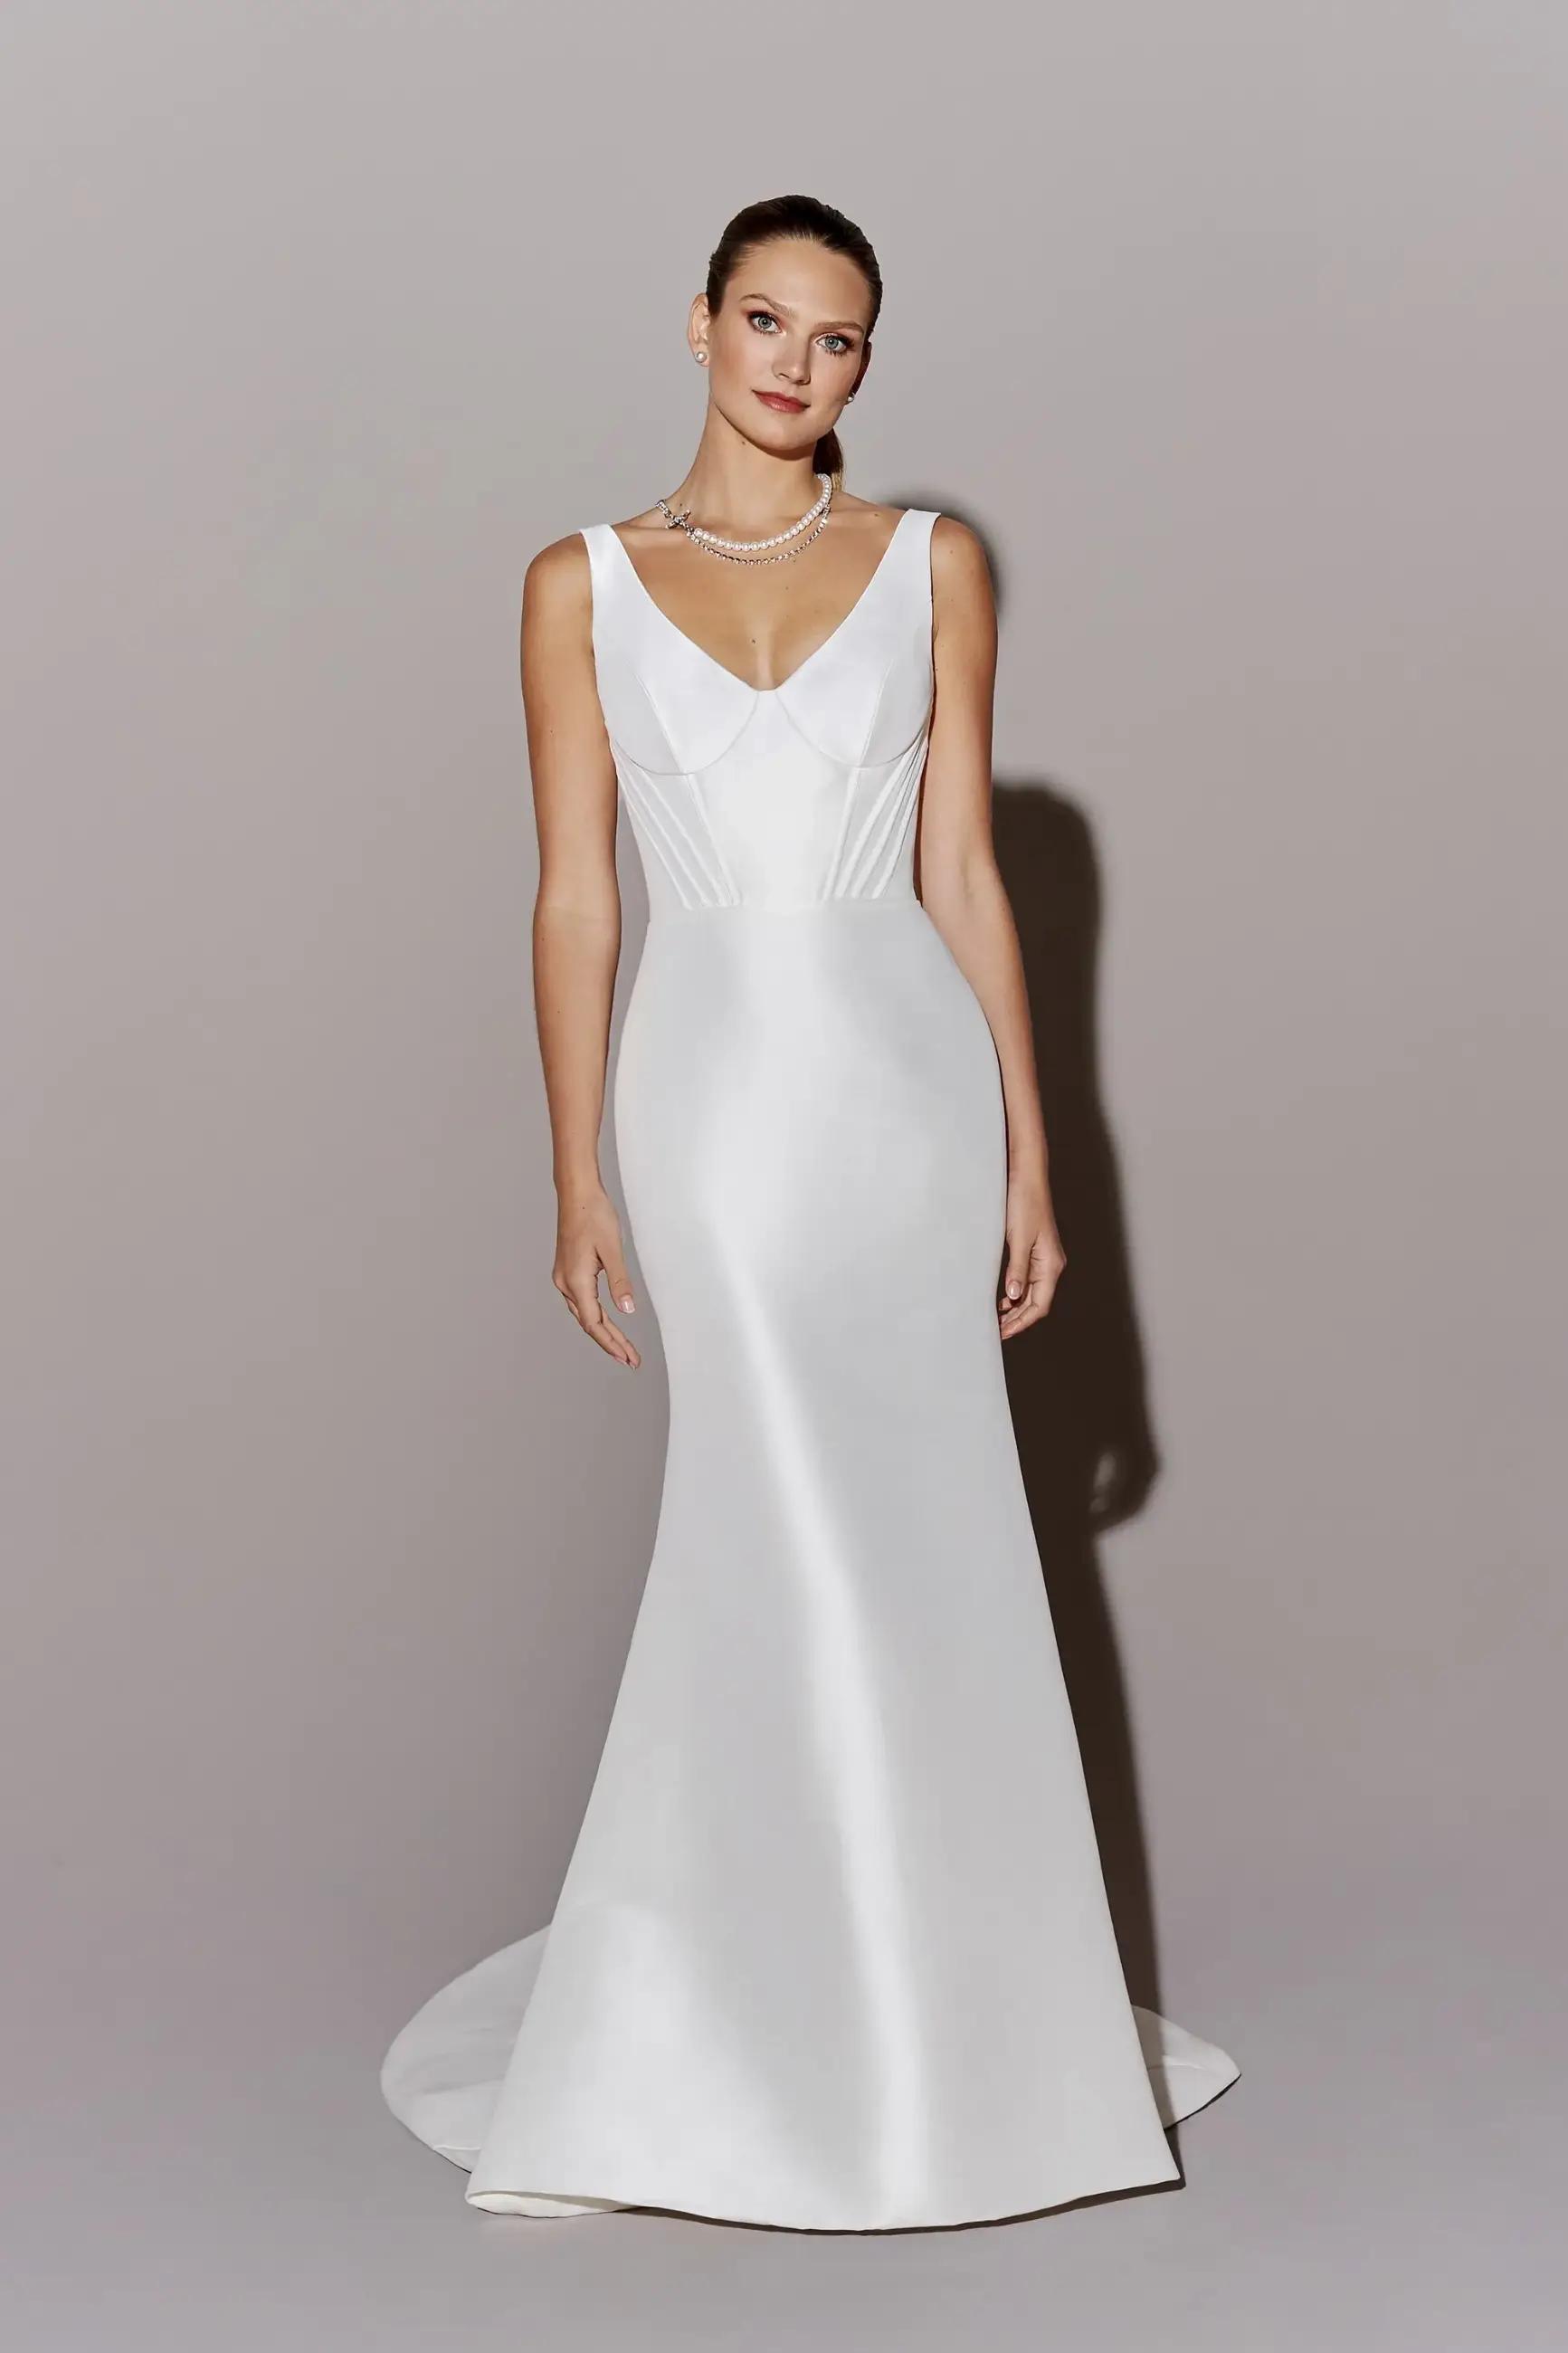 Glamorous vs. Minimalist Wedding Gowns: Which Suits Your Style? Image